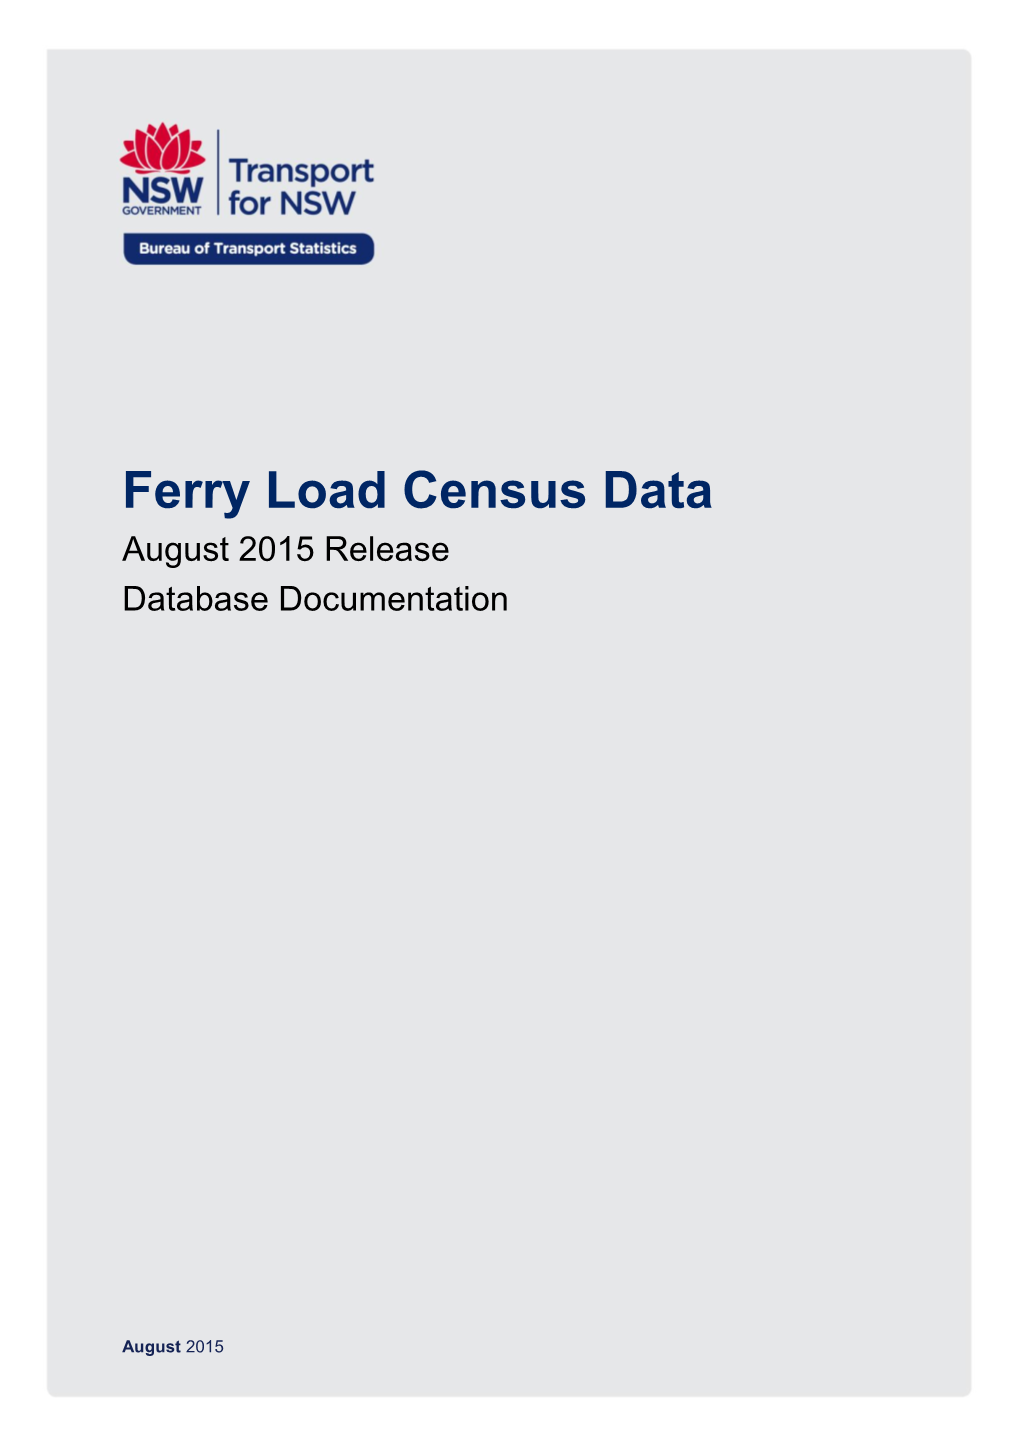 Ferry Load Census Data, August 2015 Release